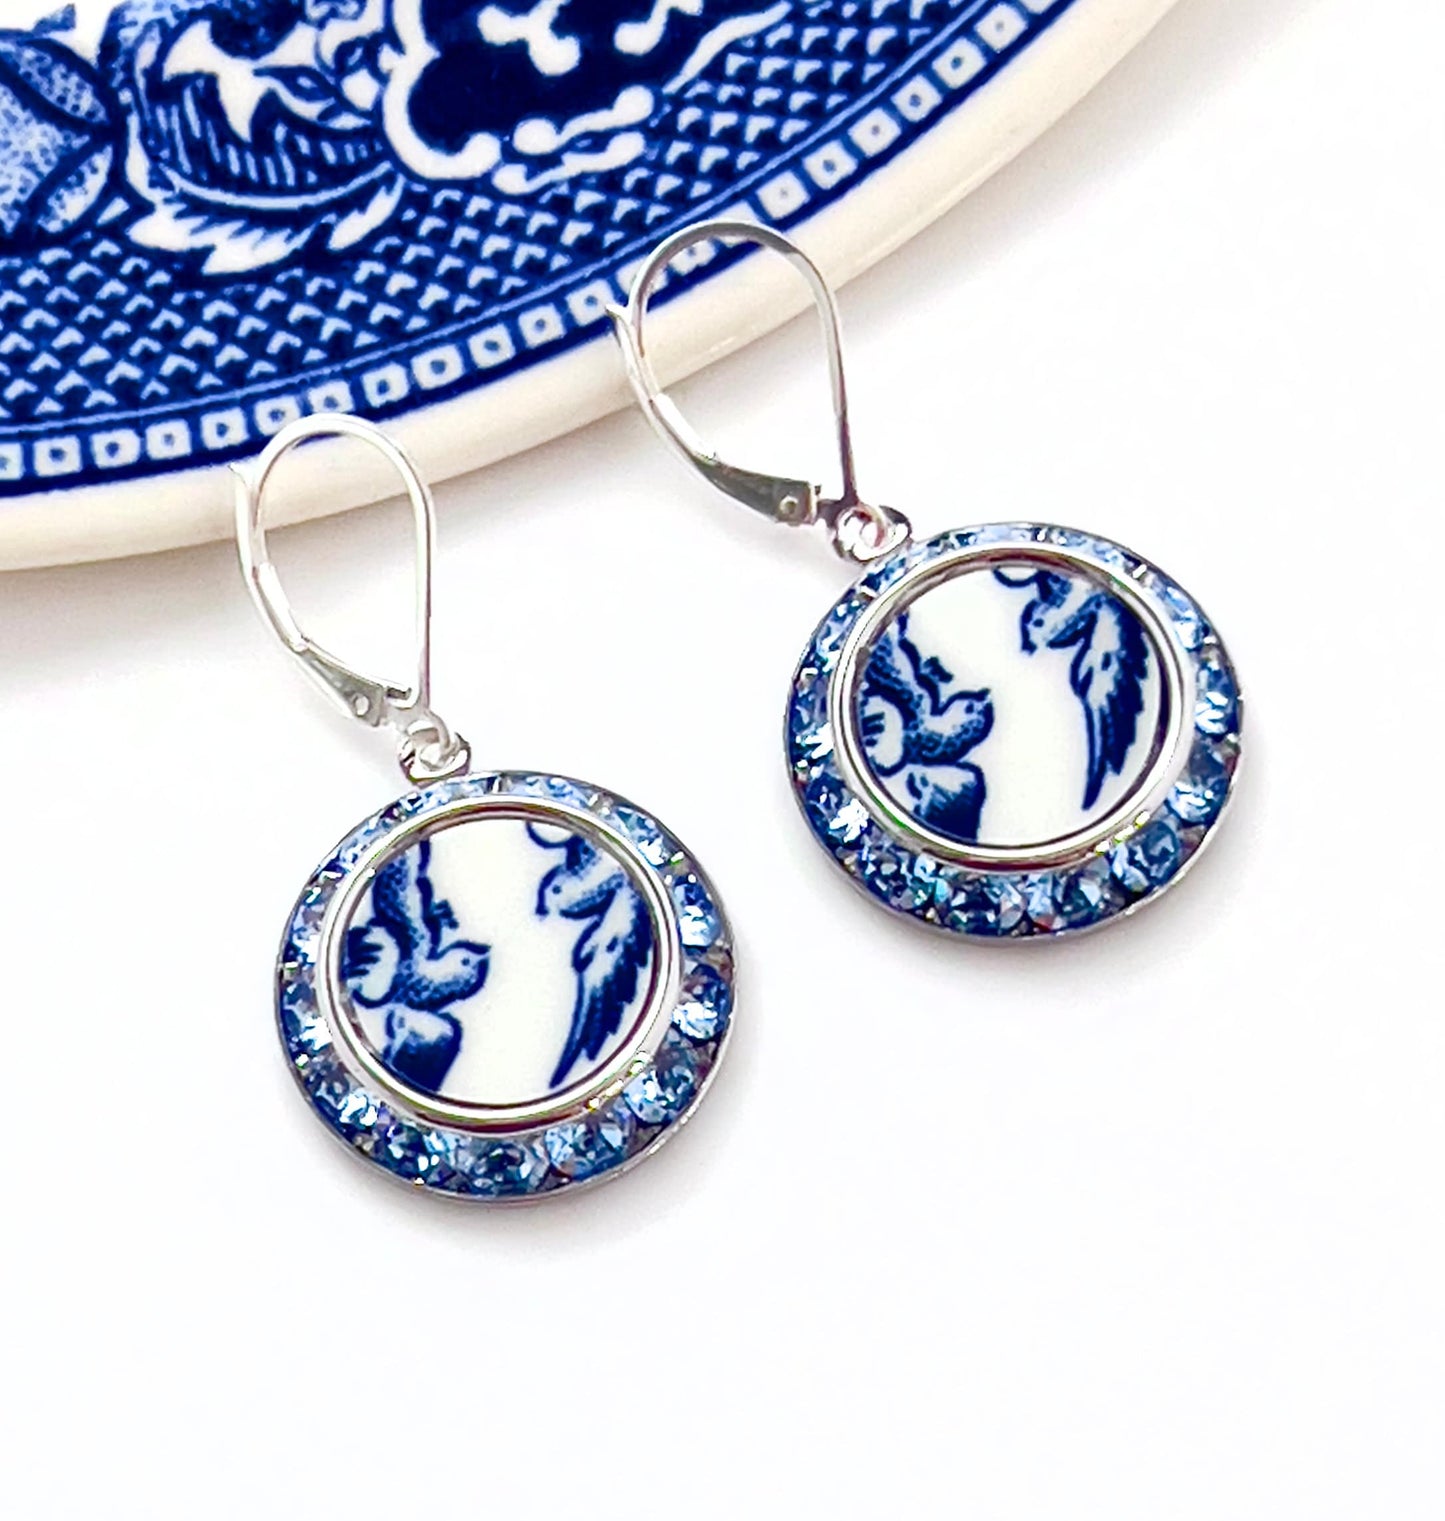 Love Birds Broken China Jewelry Set, Romantic 20th Anniversary Gift for Wife, Vintage Blue Willow Ware China